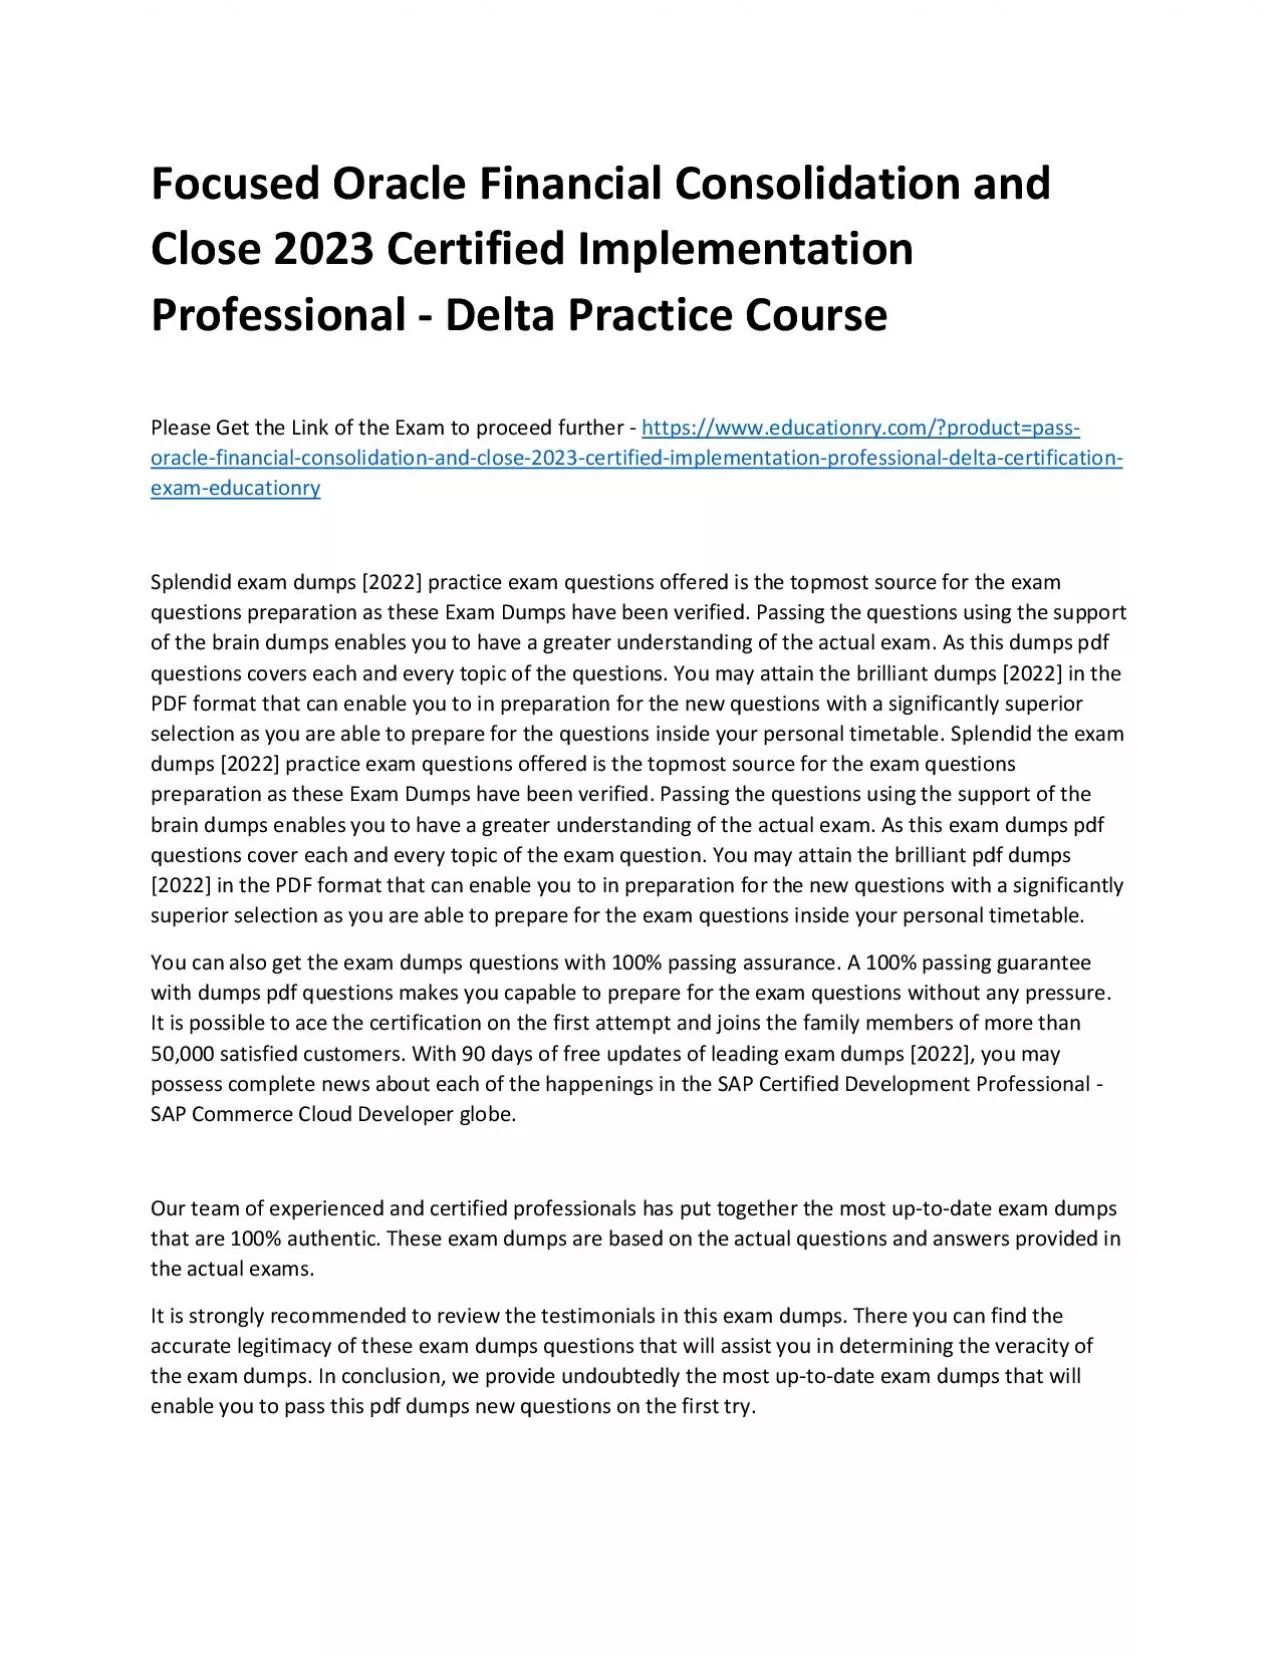 Focused Oracle Financial Consolidation and Close 2023 Certified Implementation Professional